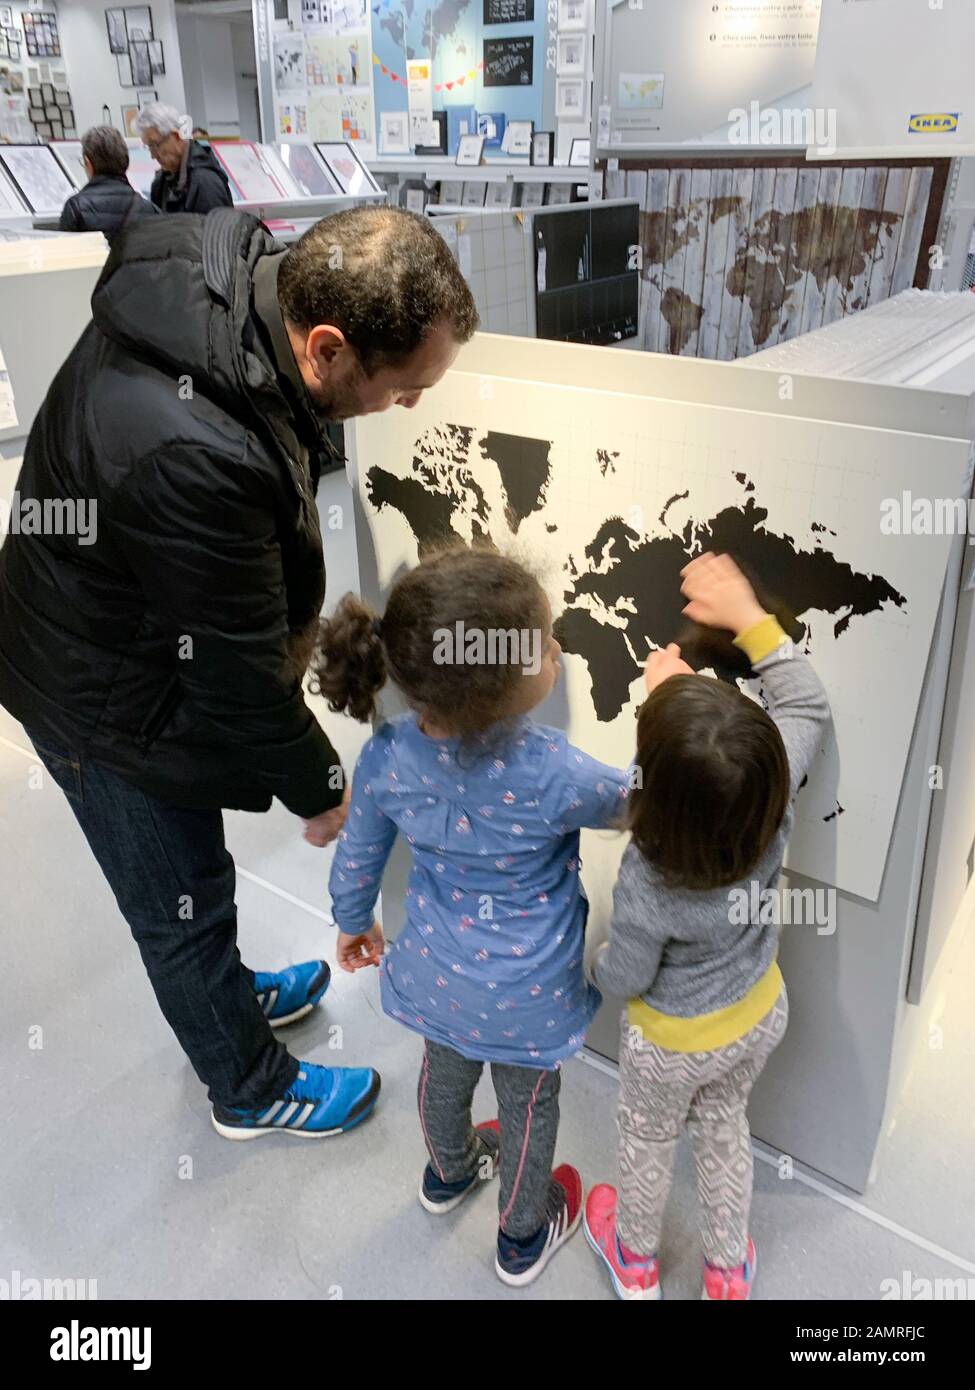 Paris, France - Dec 1, 2018: Busy atmosphere inside IKEA furniture store with customers choosing the right objects father explaining to girls the world map Stock Photo